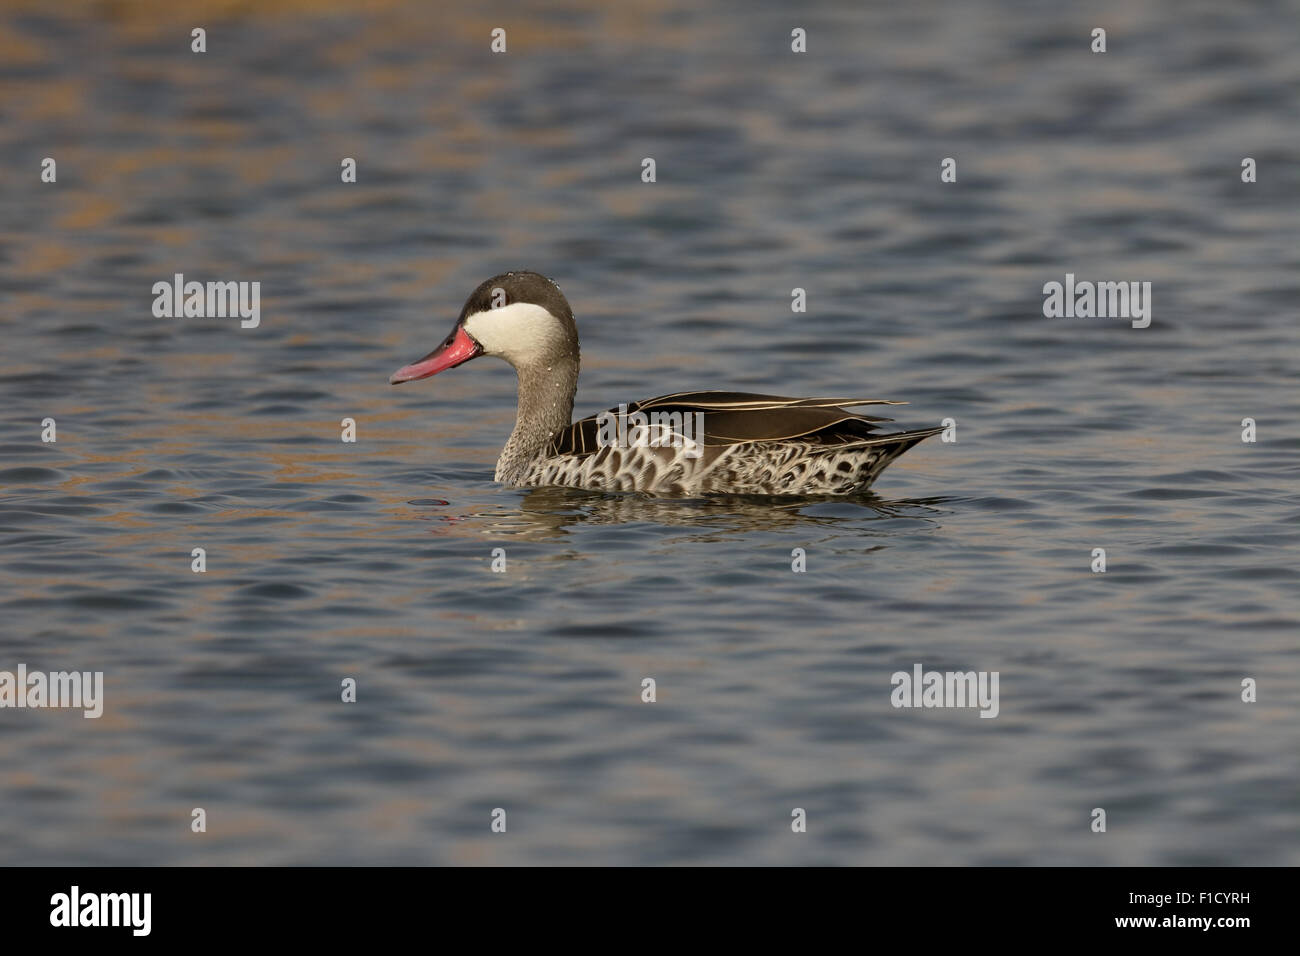 Red-billed teal, Anas erythrorhyncha, single bird on water, South Africa, August 2015 Stock Photo